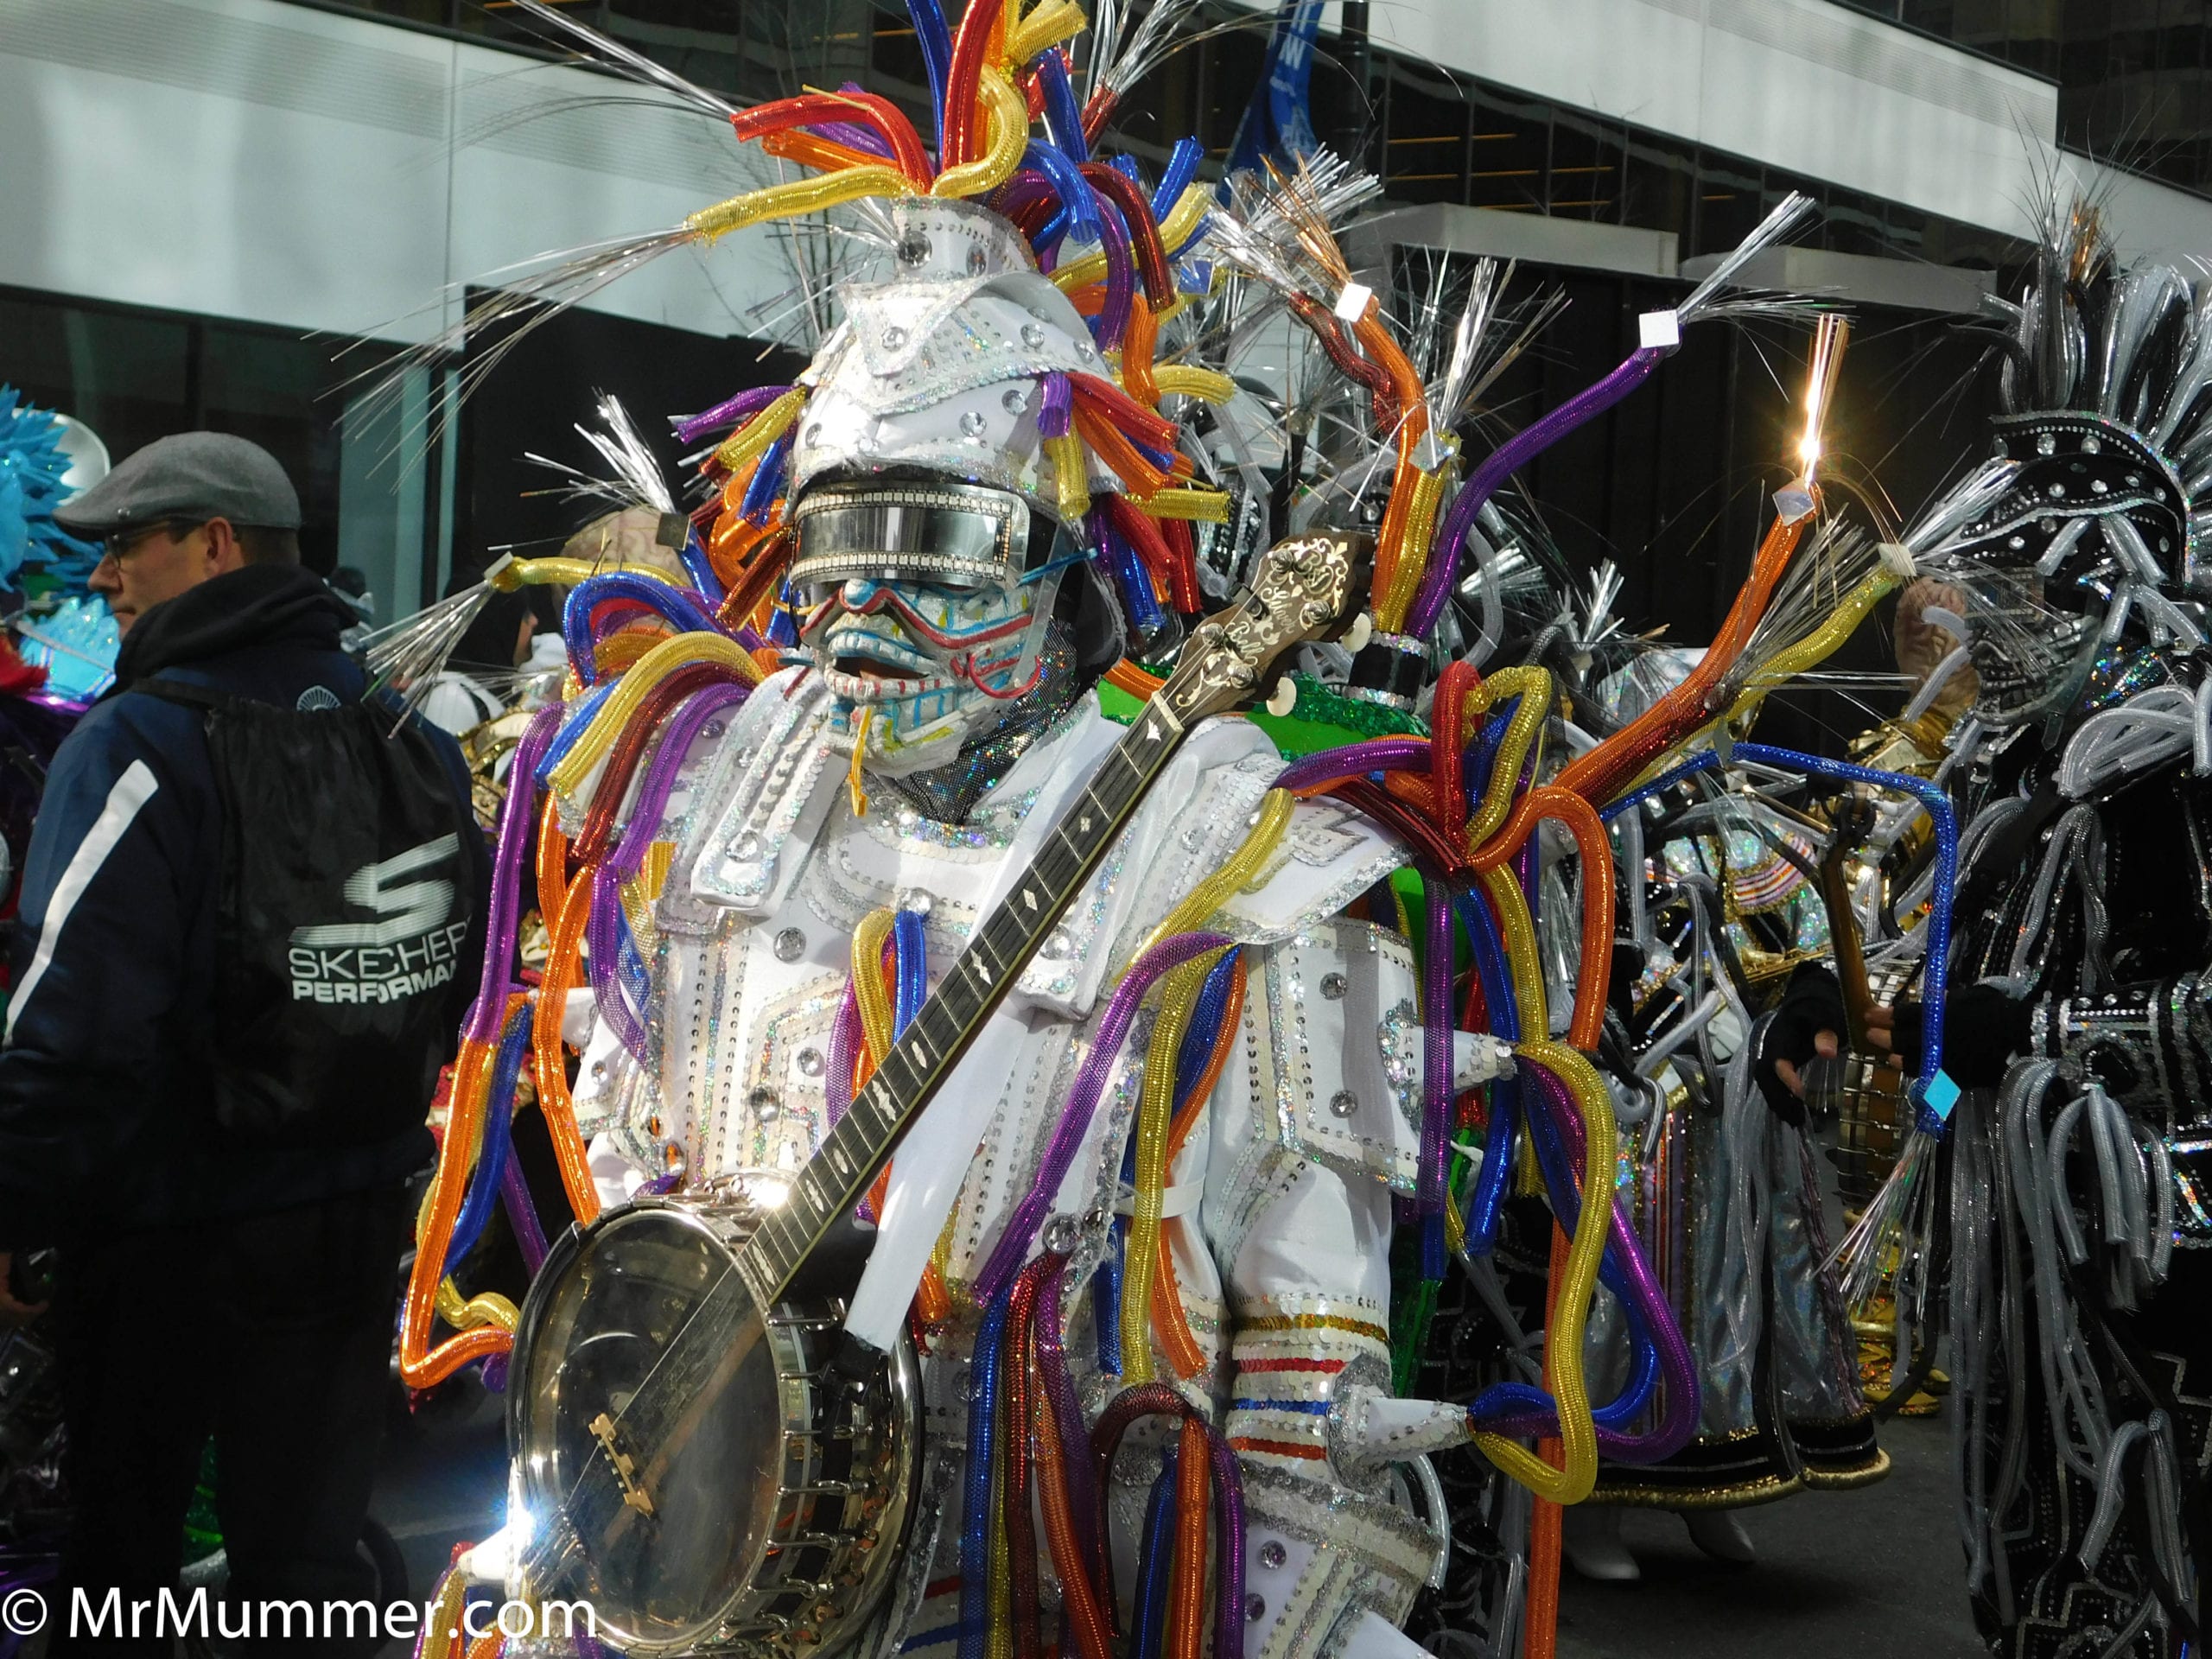 Mummers Schedule 2022 2022 String Band Order Of March And Themes - Mr Mummer - Philadelphia  Mummers News And Information About The Mummers Parade In Philadelphia